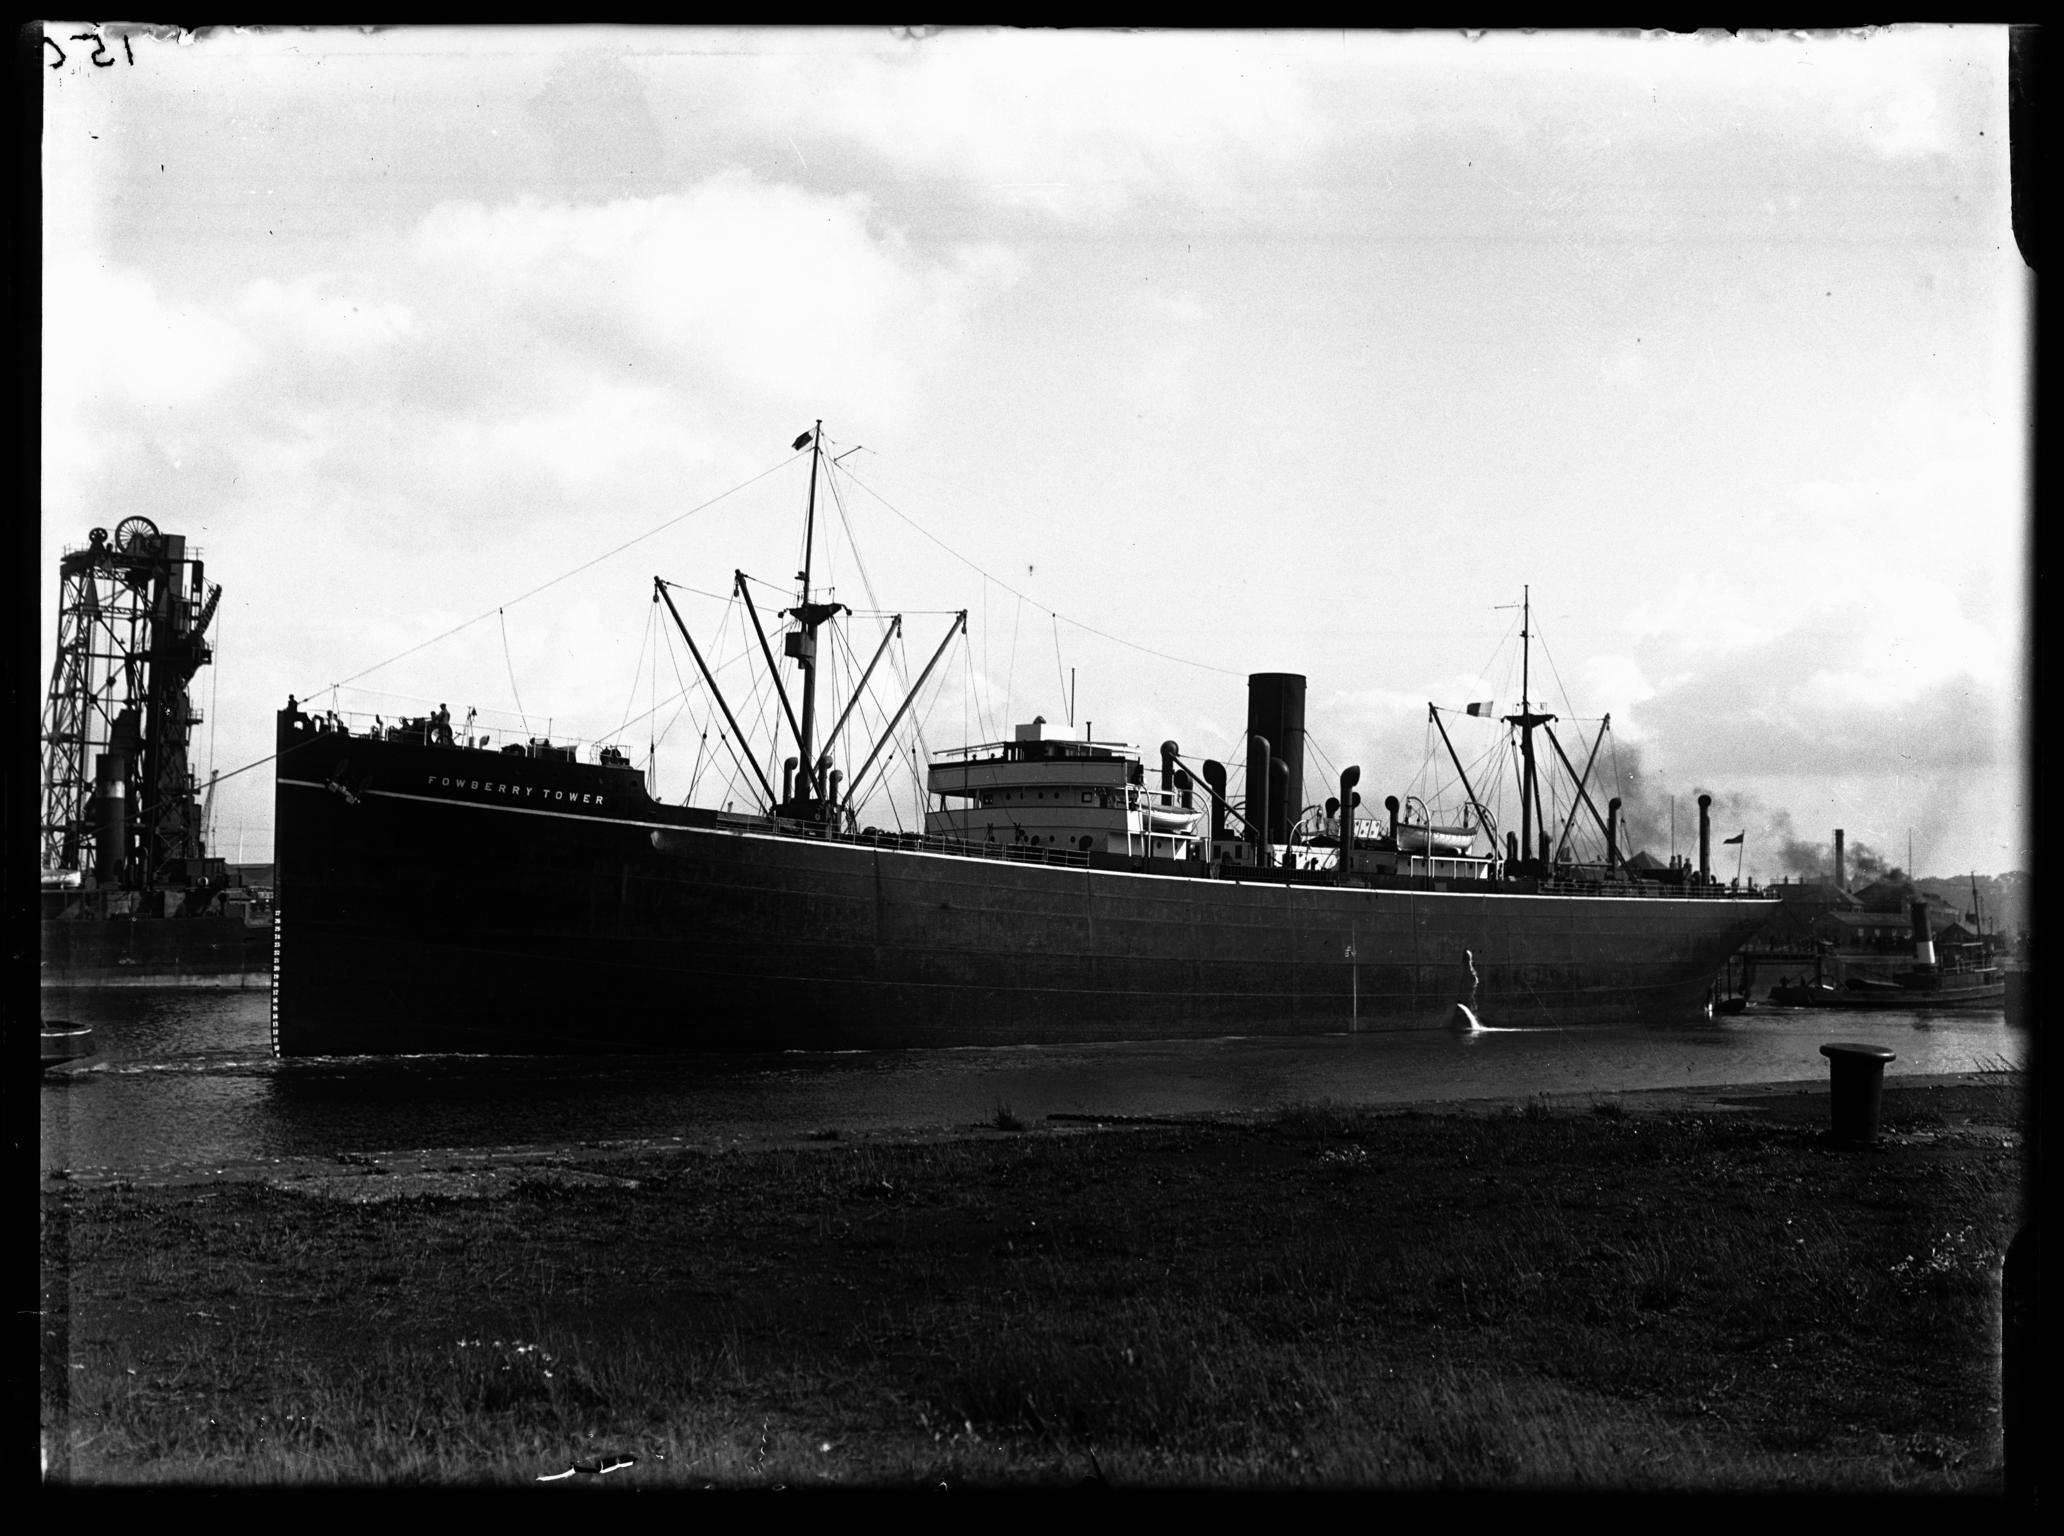 S.S. FOWBERRY TOWER, glass negative